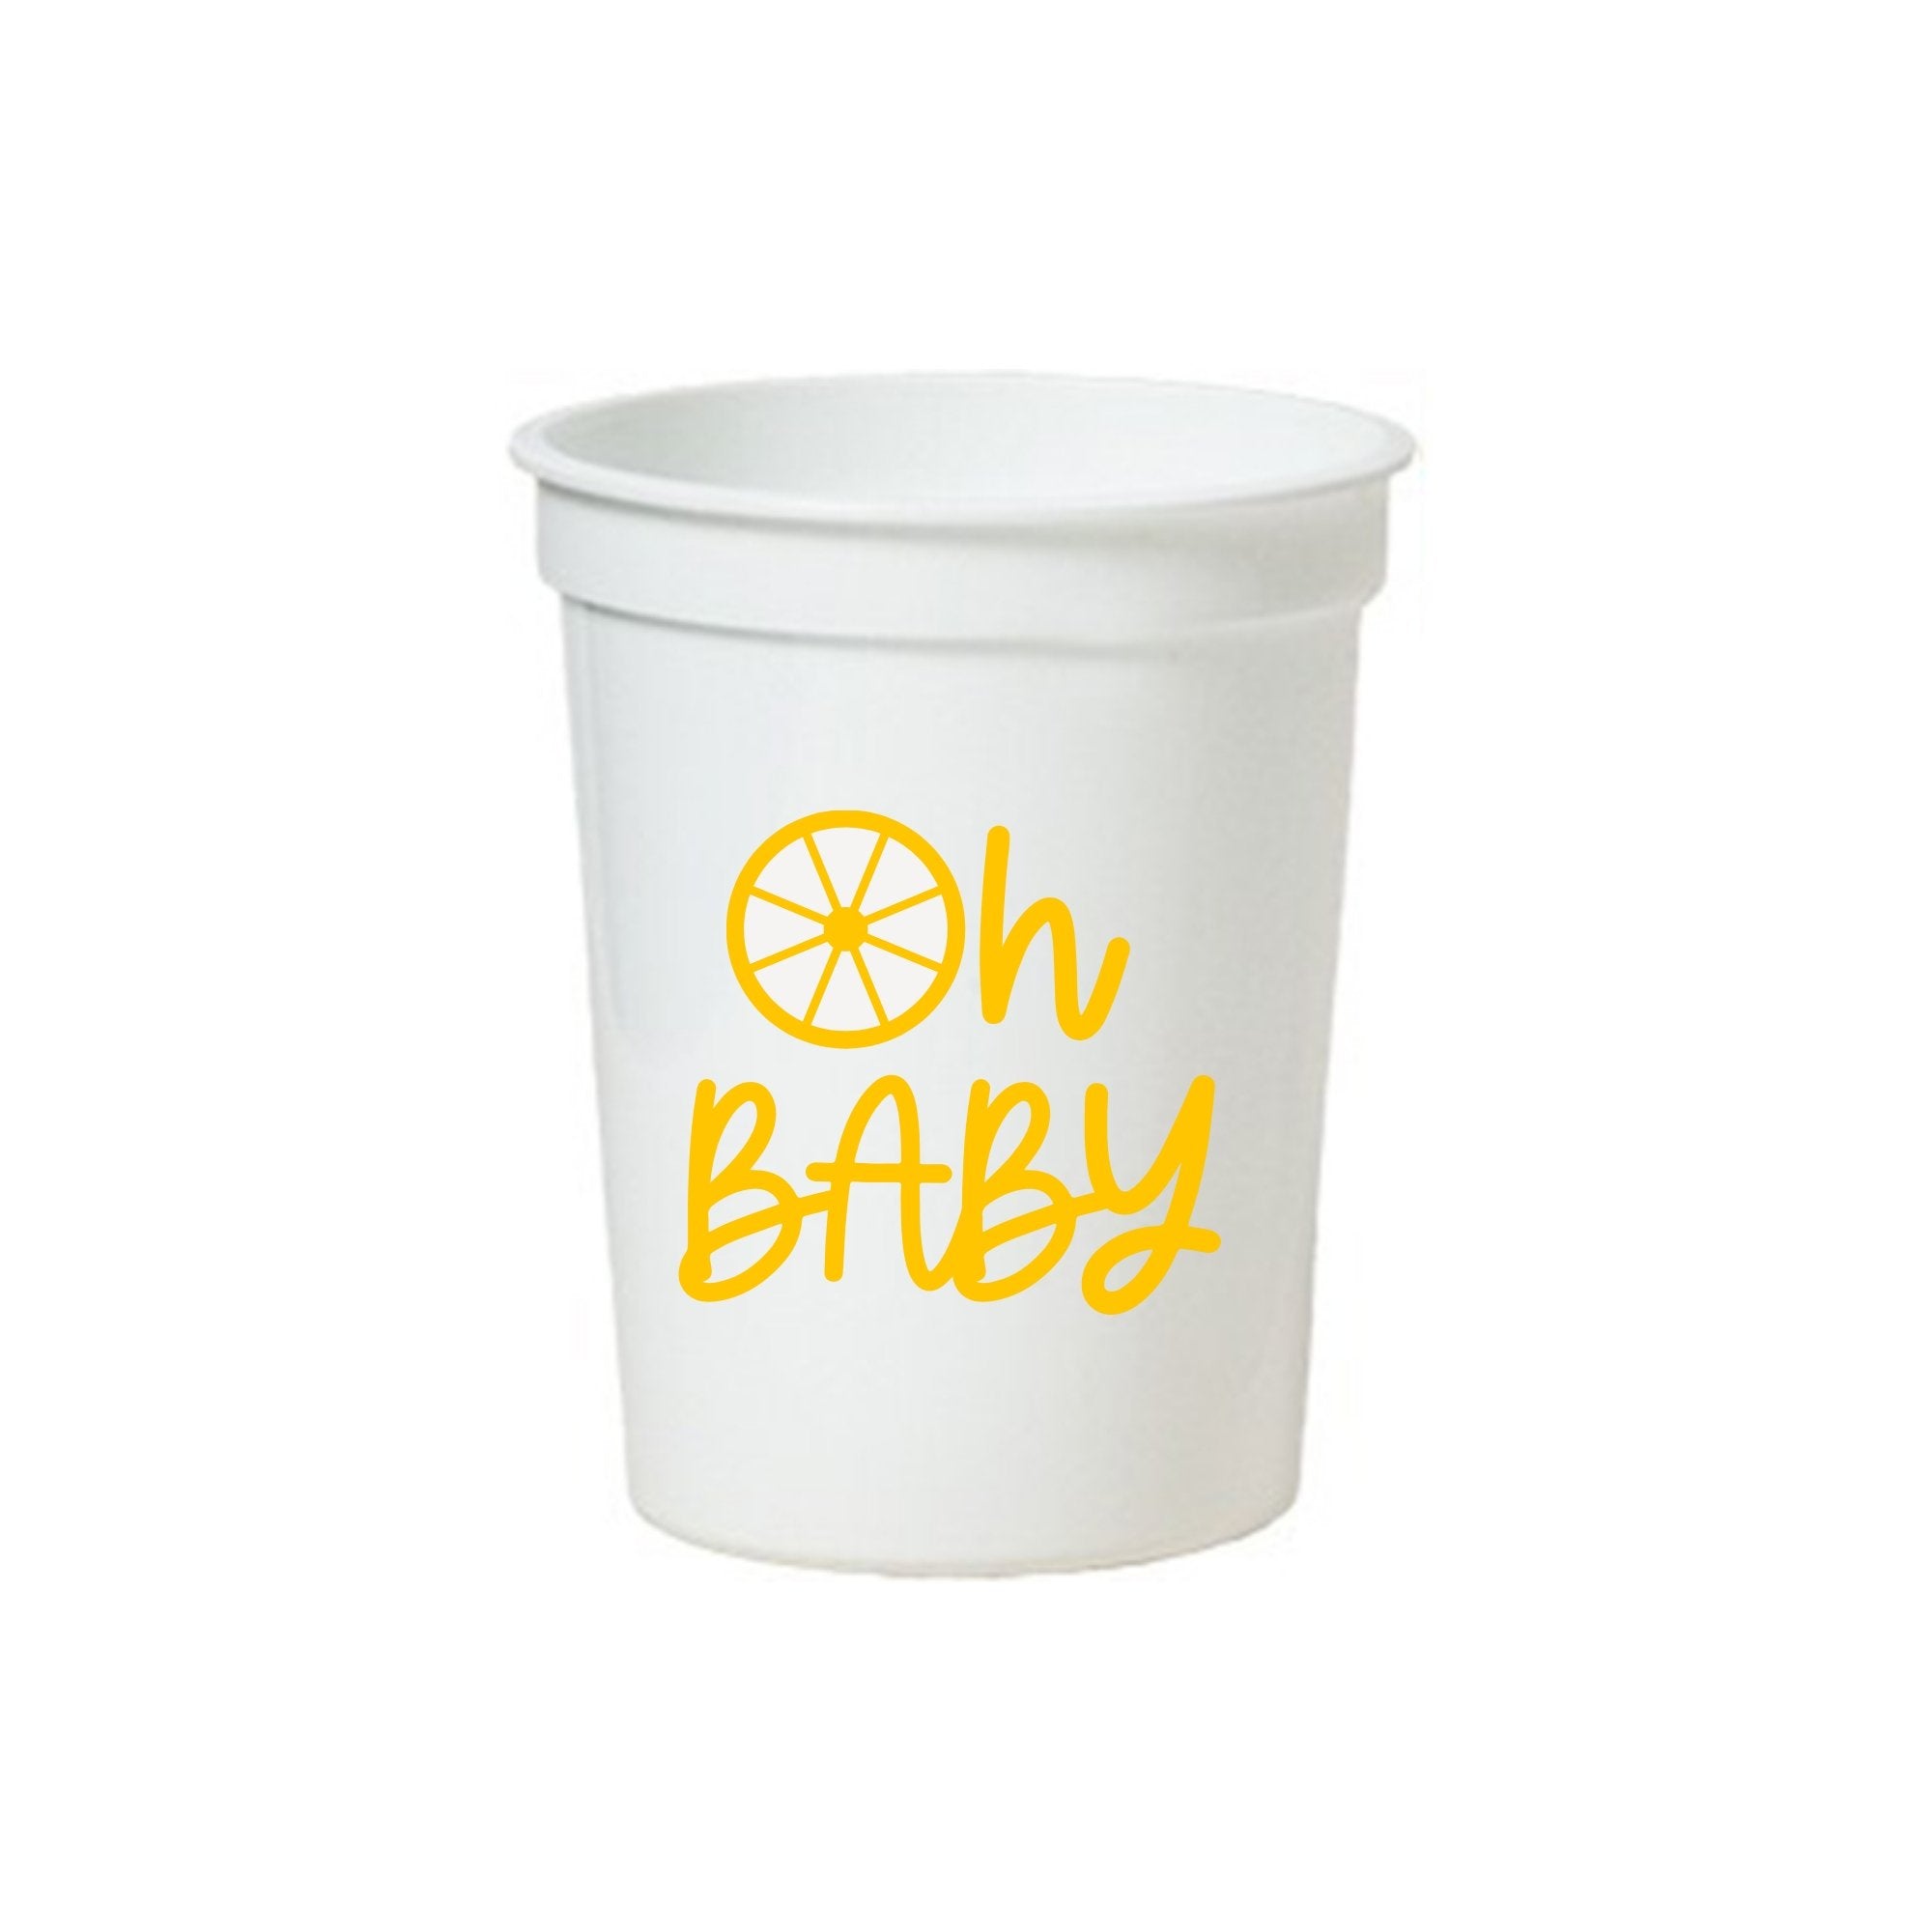 A white stadium cup reads "Oh Baby" on the front with the "O" as a lemon slice